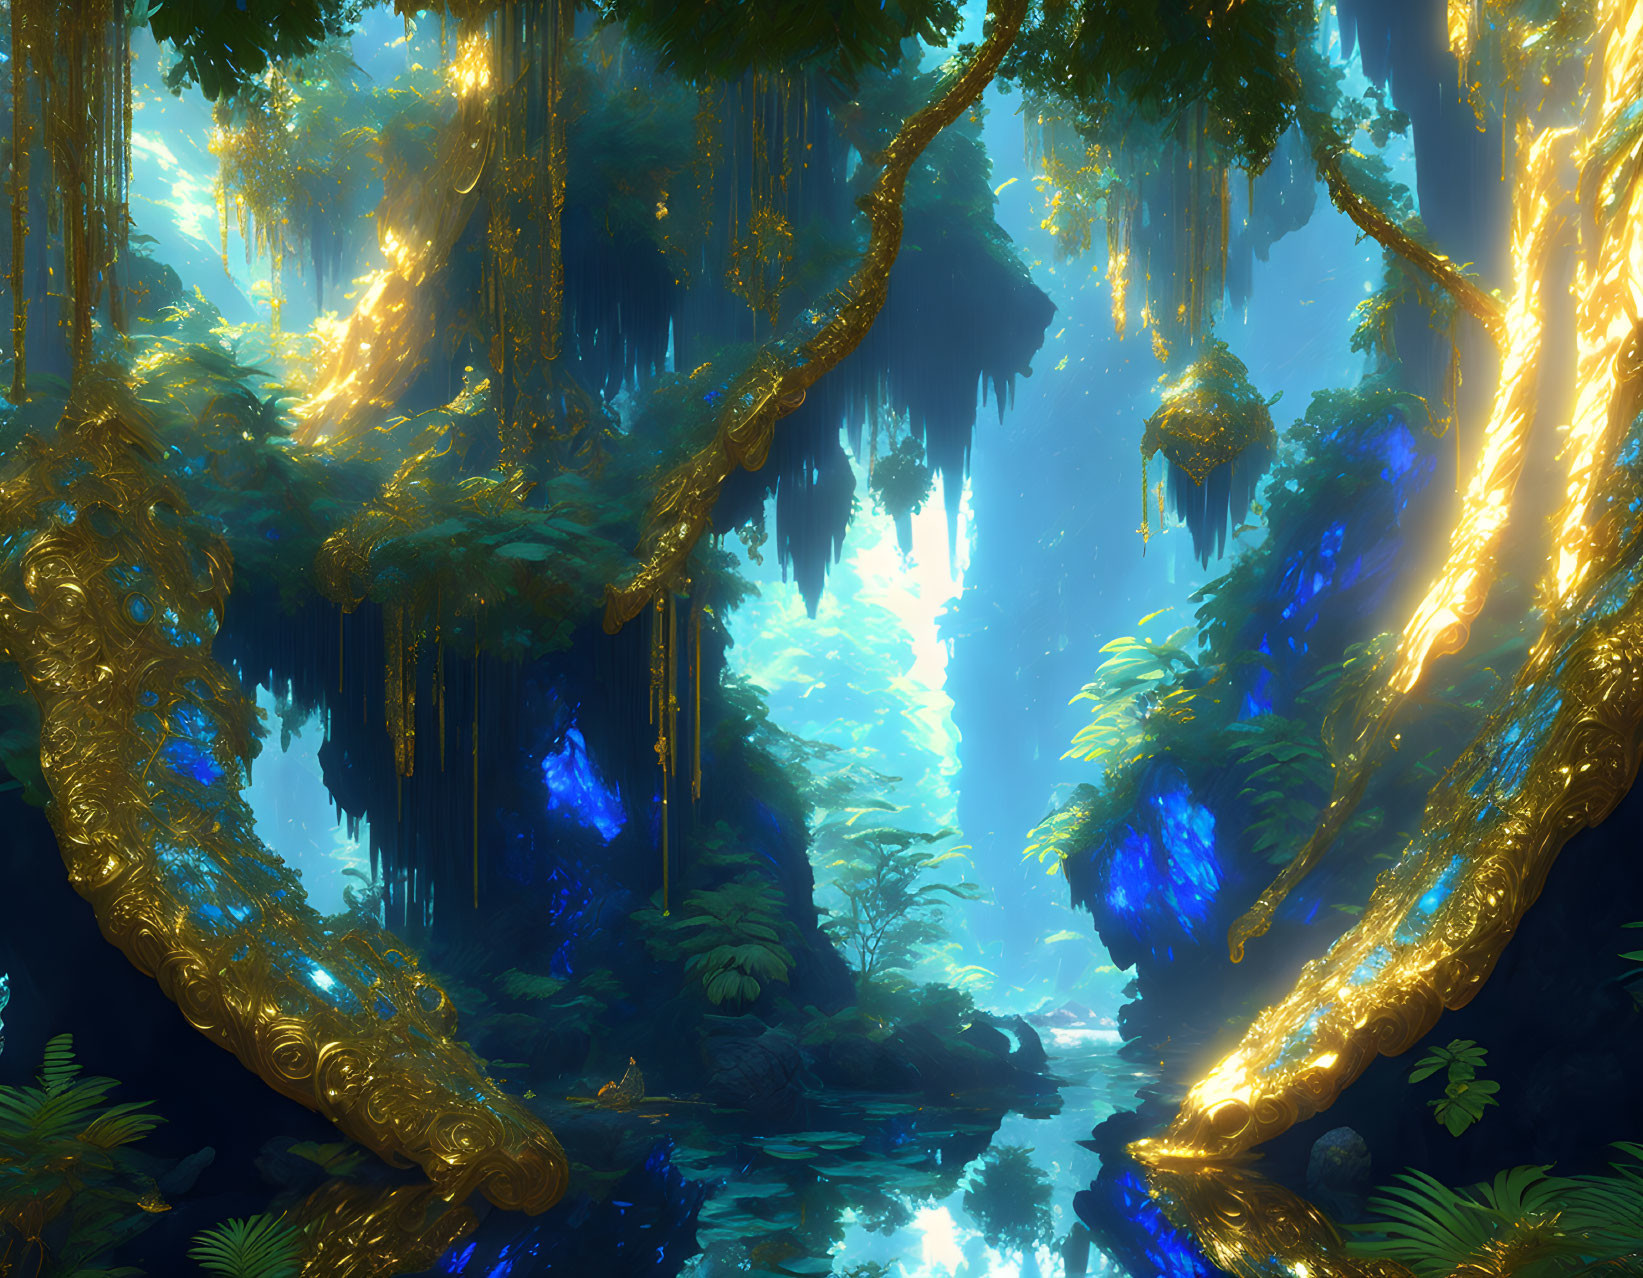 Mystical forest glade with glowing blue plants and serene stream